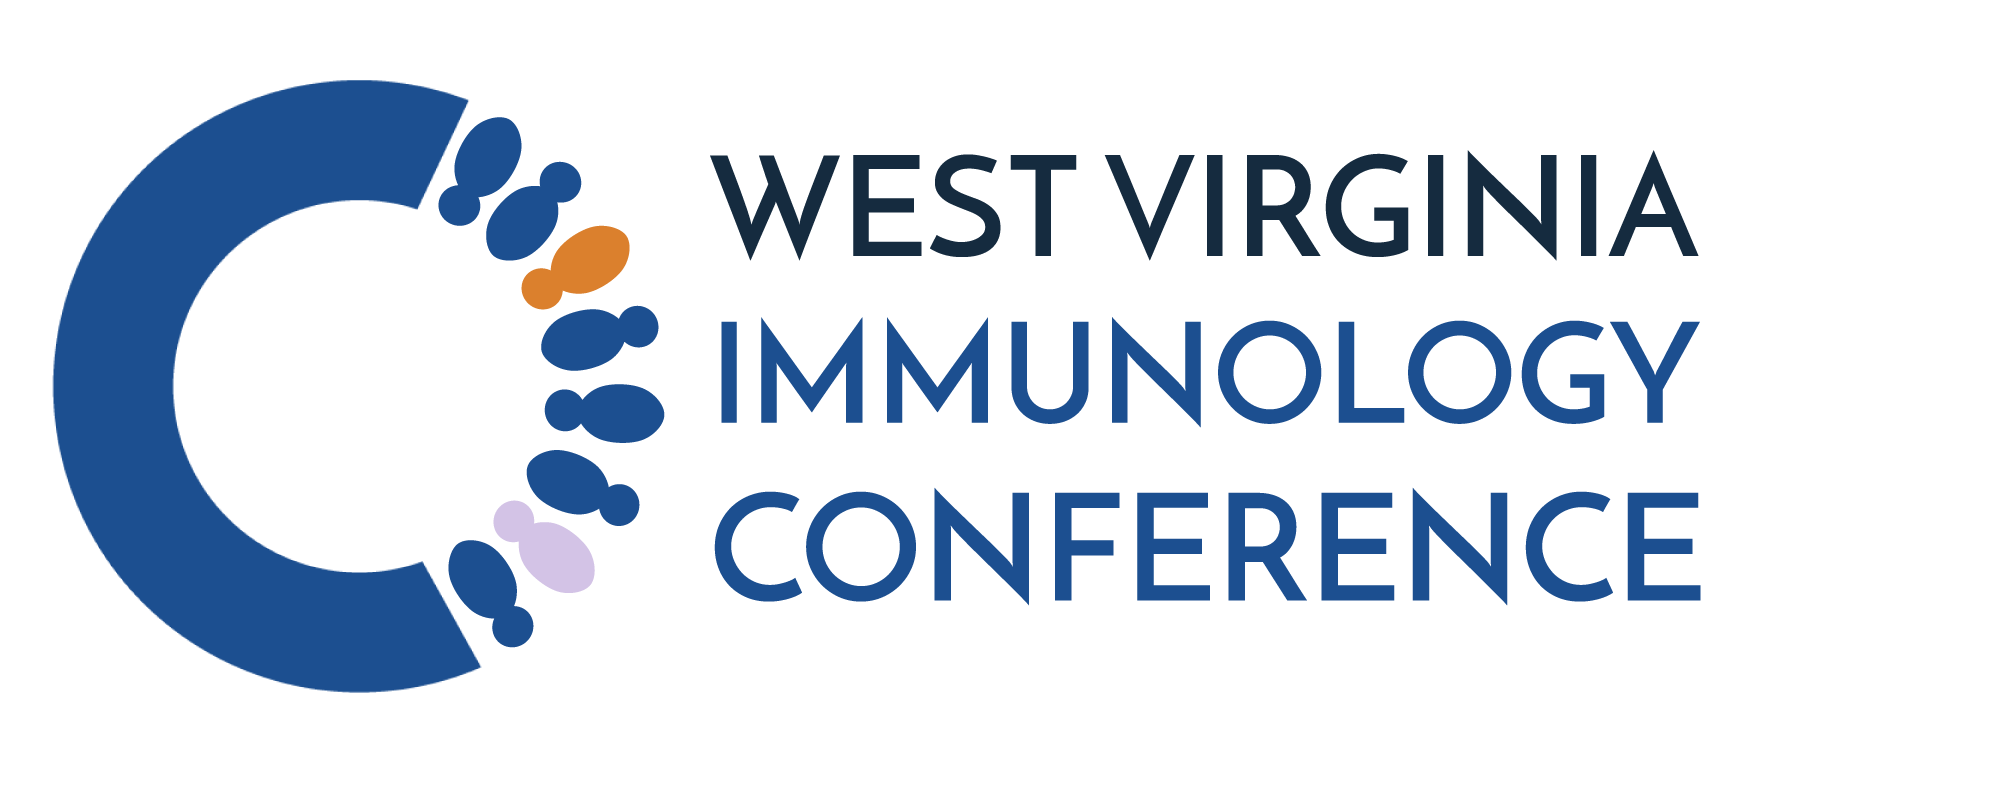 WEST VIRGINIA IMMUNOLOGY CONFERENCE